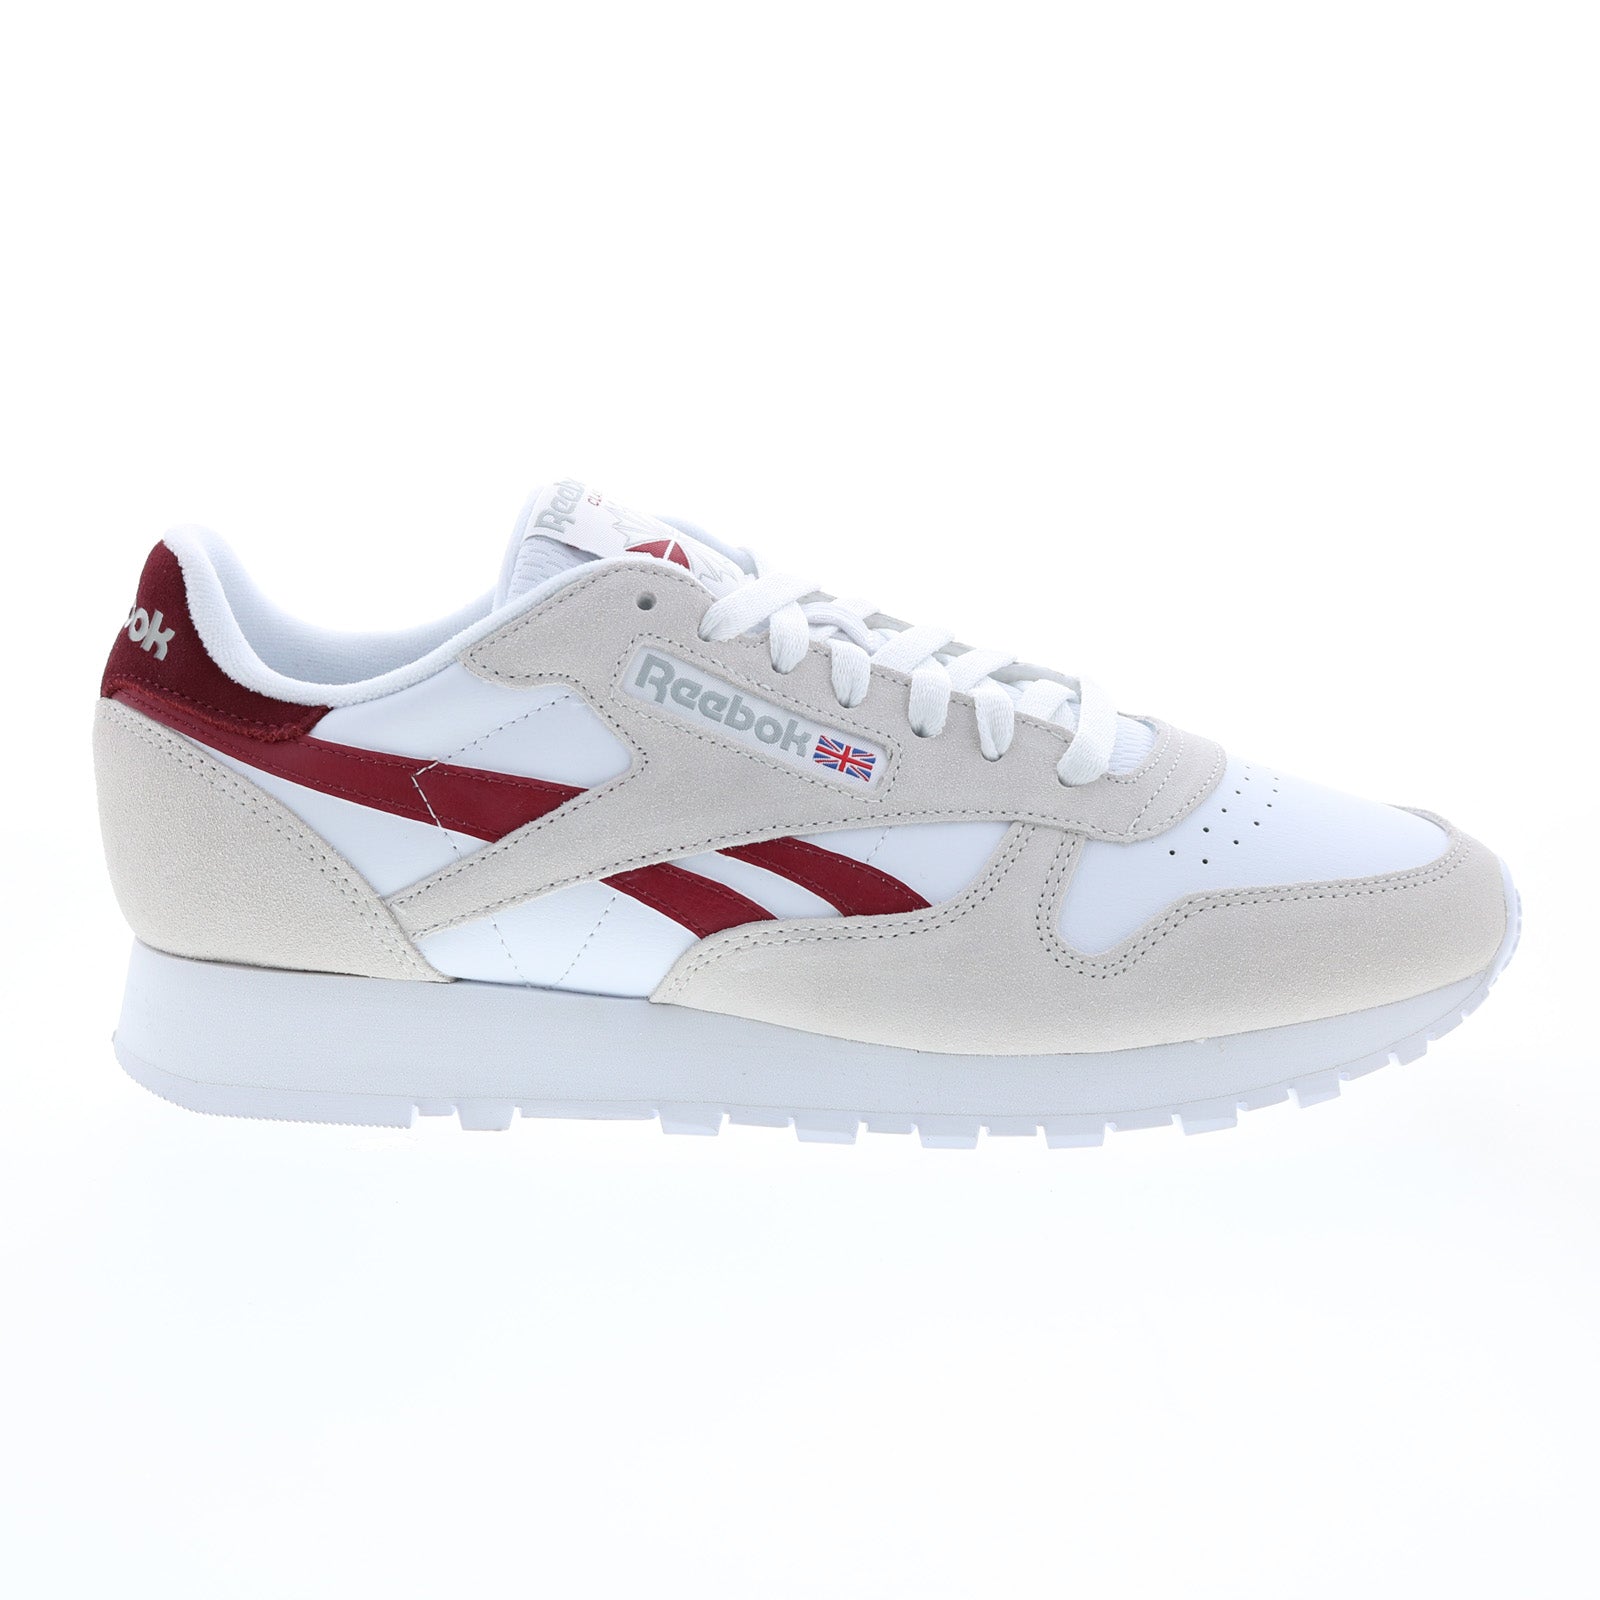 Reebok Classic Leather Mens White Suede Lifestyle Shoe - Ruze